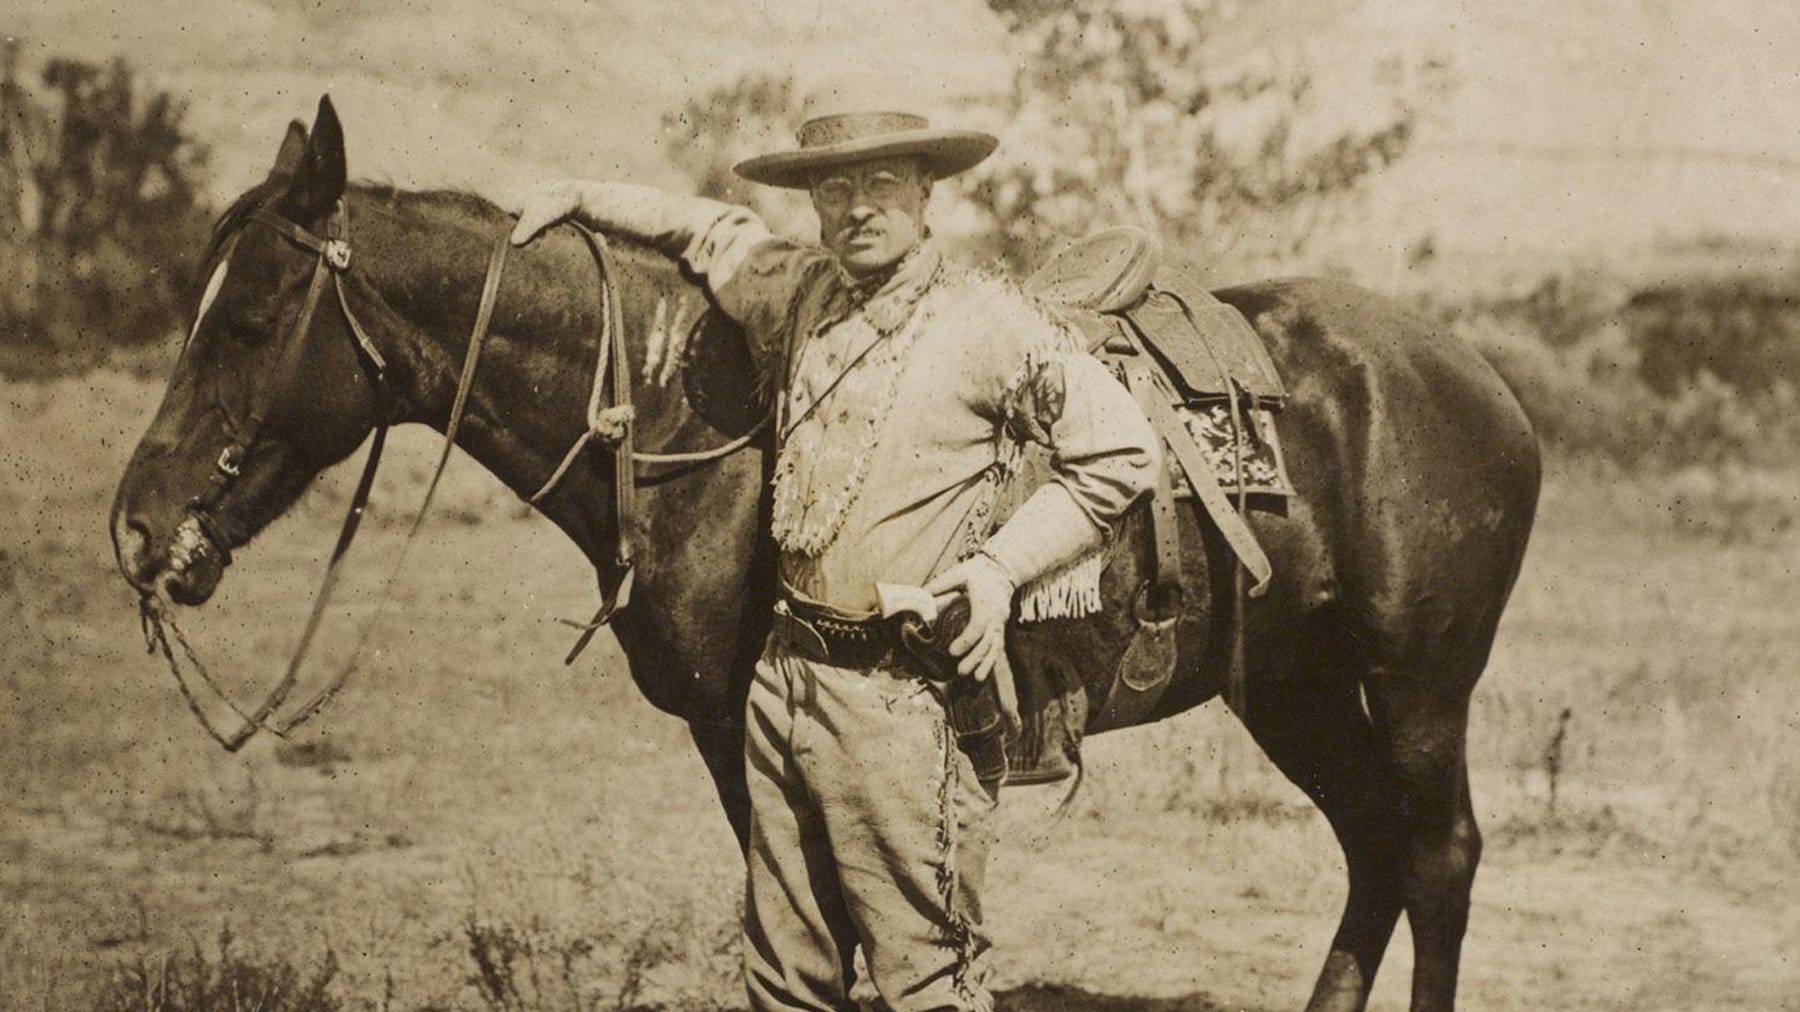 Theordore Roosevelt stands next to his horse